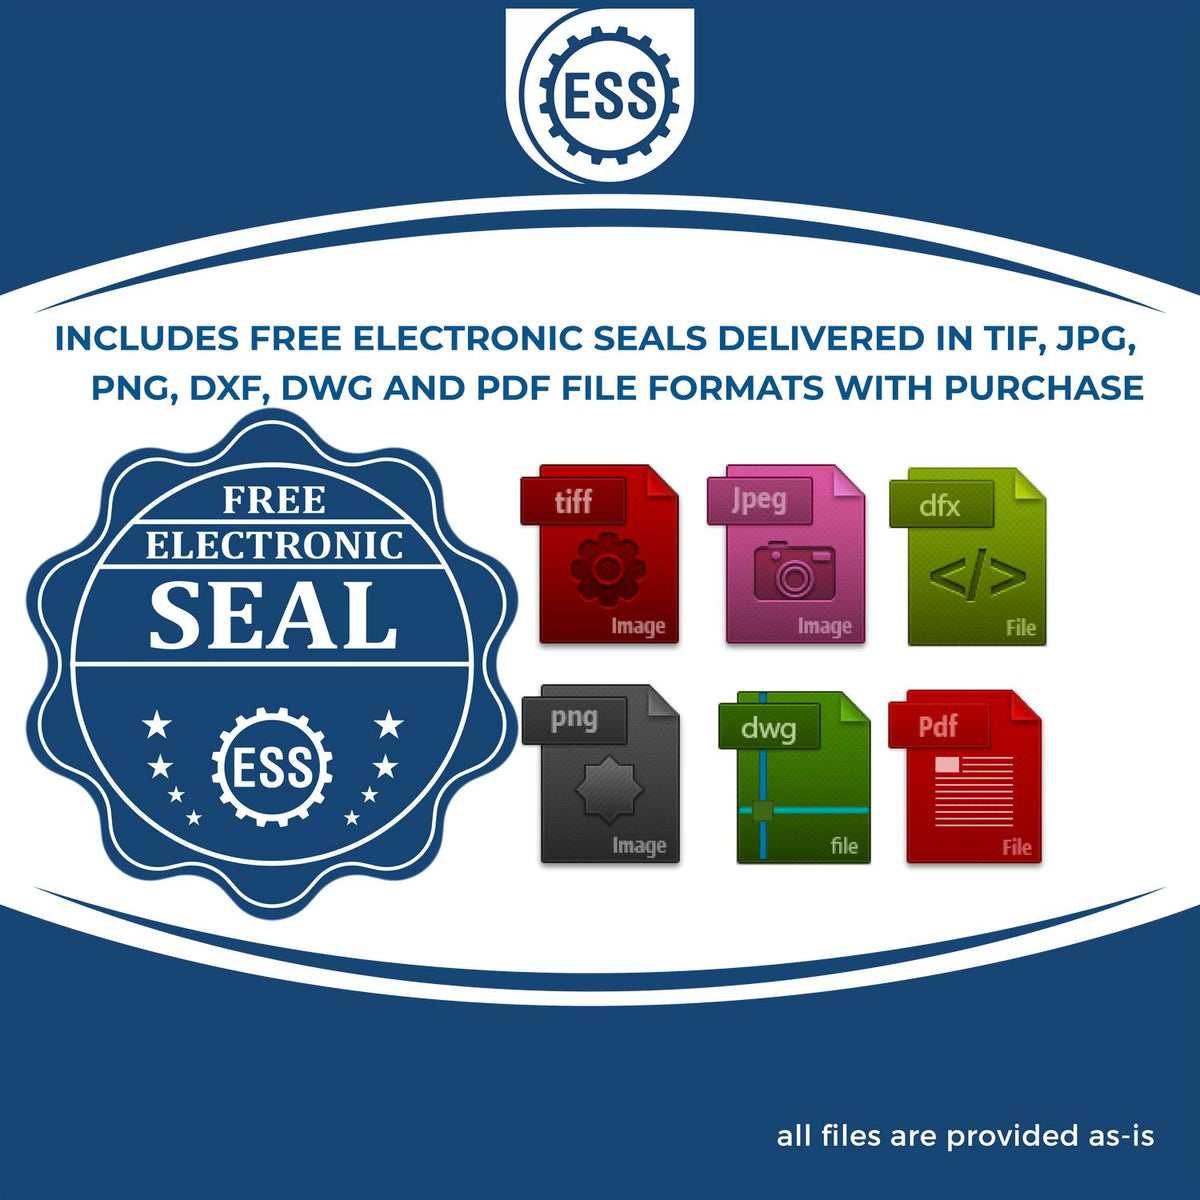 An infographic for the free electronic seal for the Self-Inking Nevada Geologist Stamp illustrating the different file type icons such as DXF, DWG, TIF, JPG and PNG.